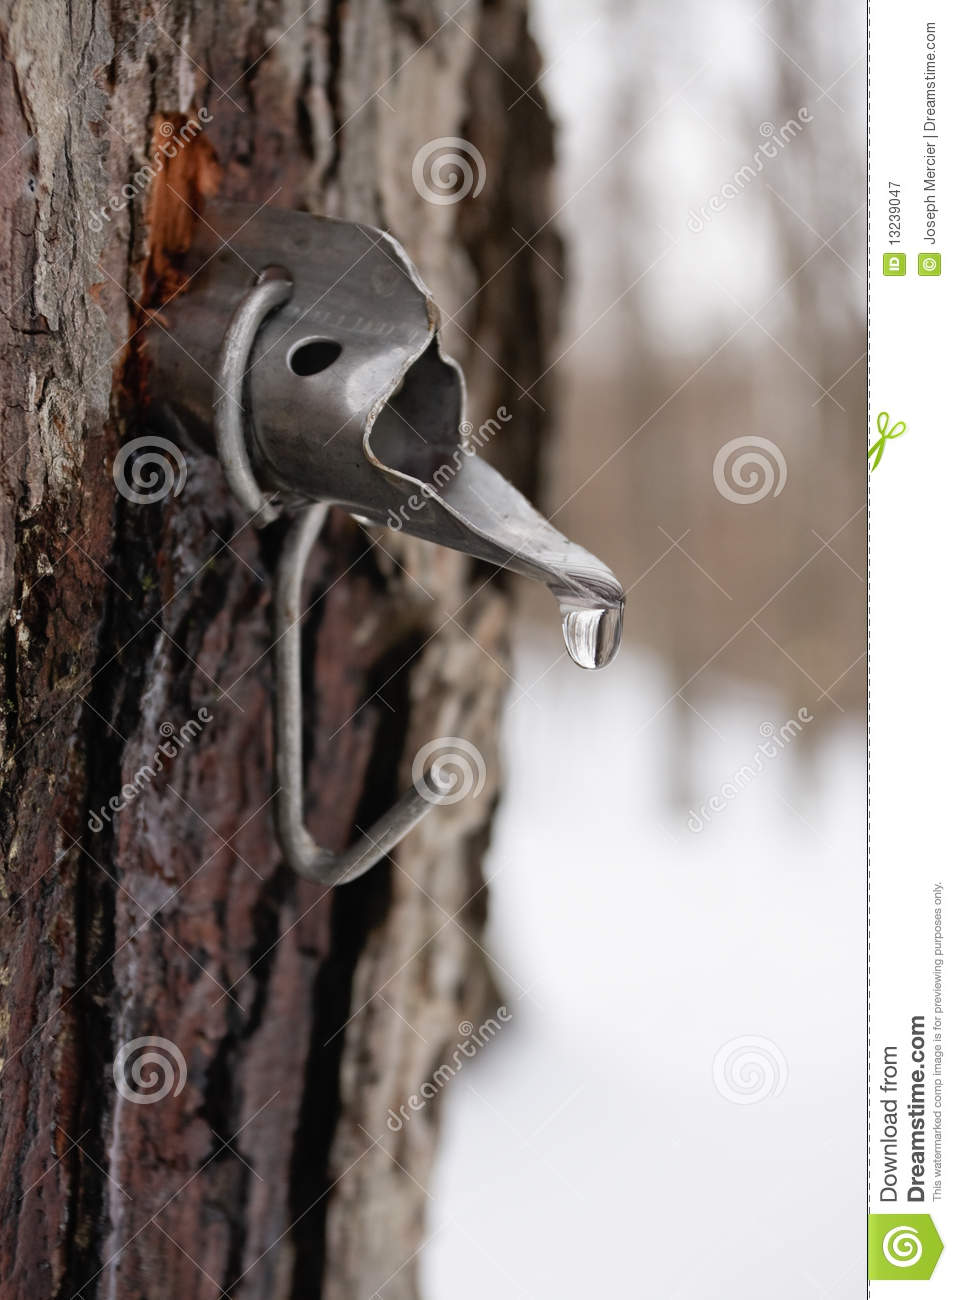 Maple Sap Droplet Flowing From Tap In Tree To Produce Maple Syrup